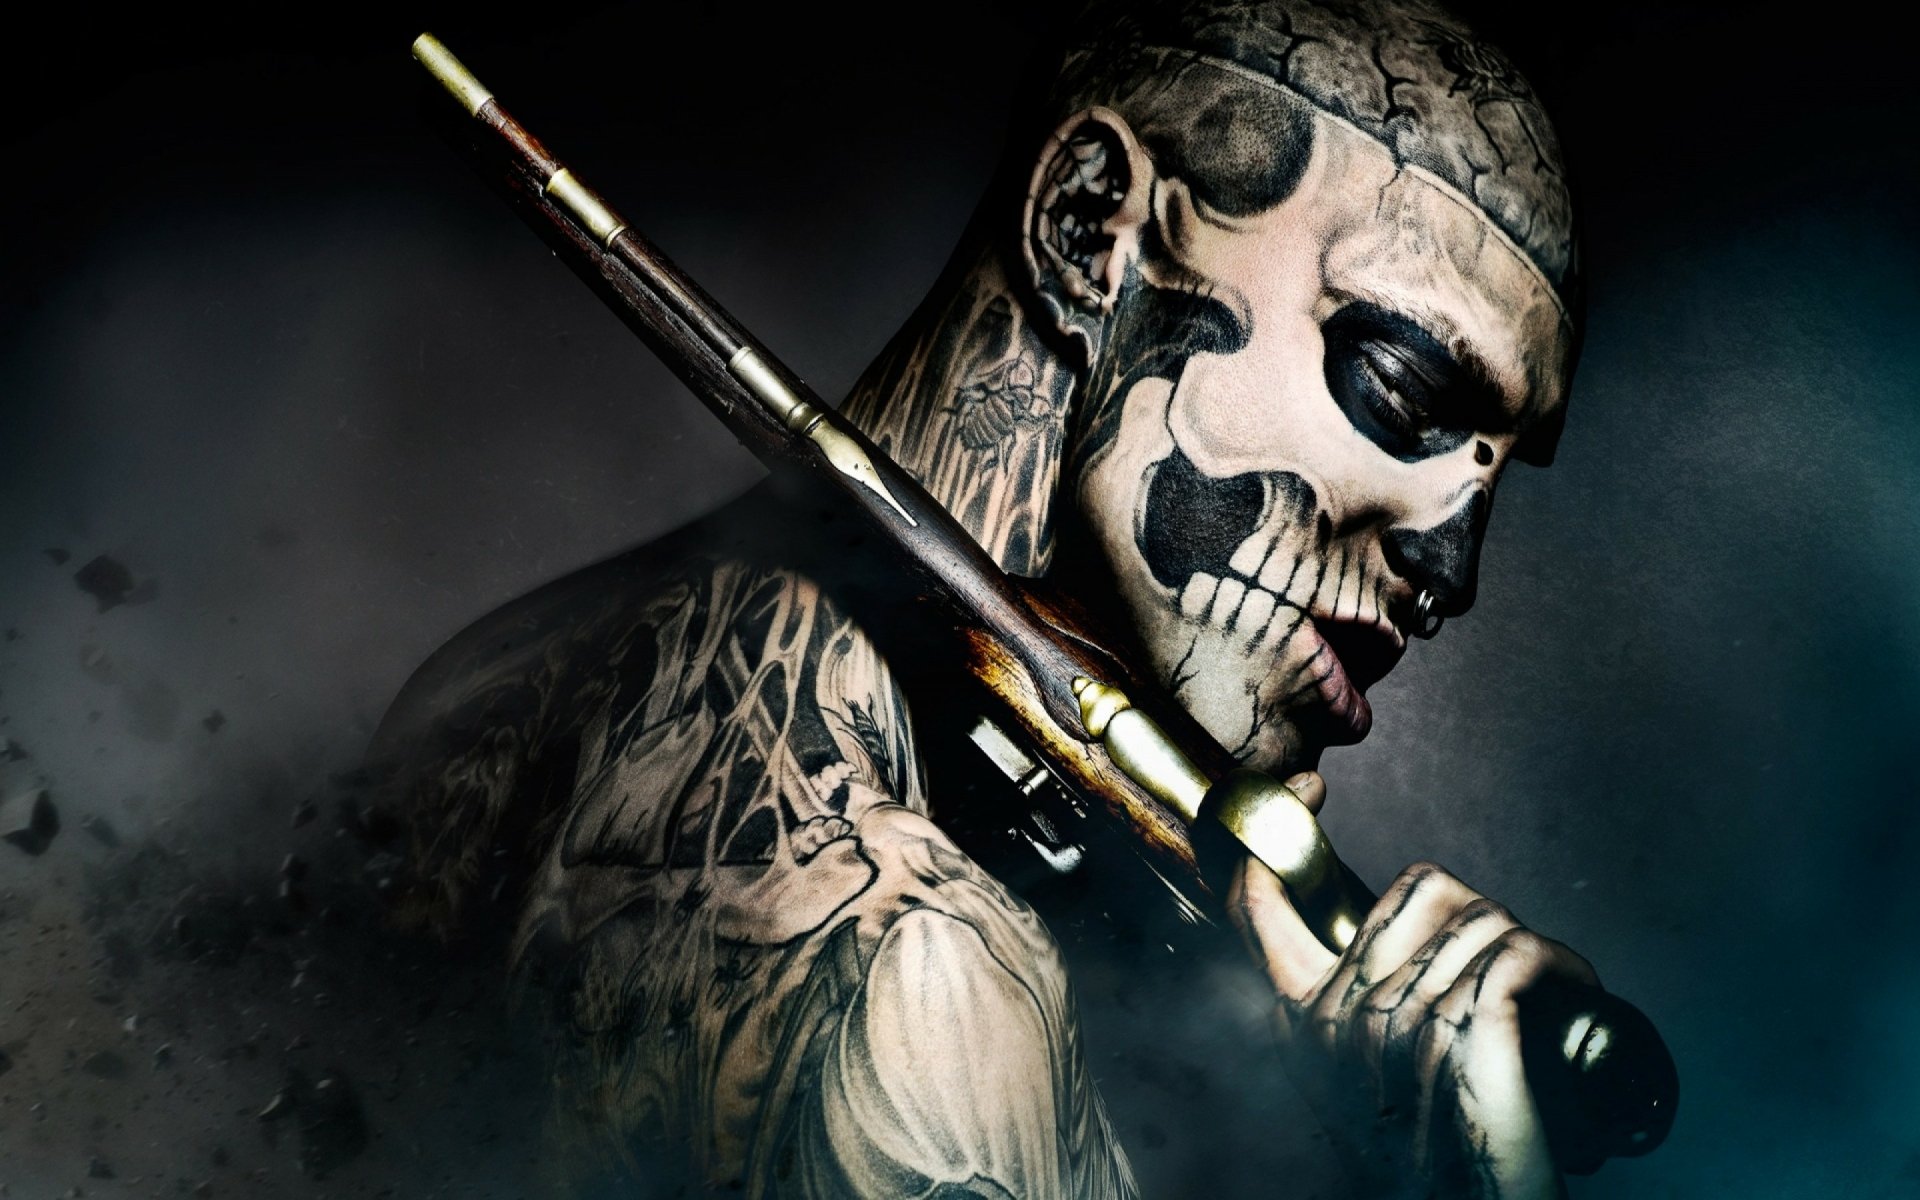 HD desktop wallpaper featuring a character from the movie 47 Ronin with a dramatic tattoo and holding a gun, depicted against a misty, dark backdrop.